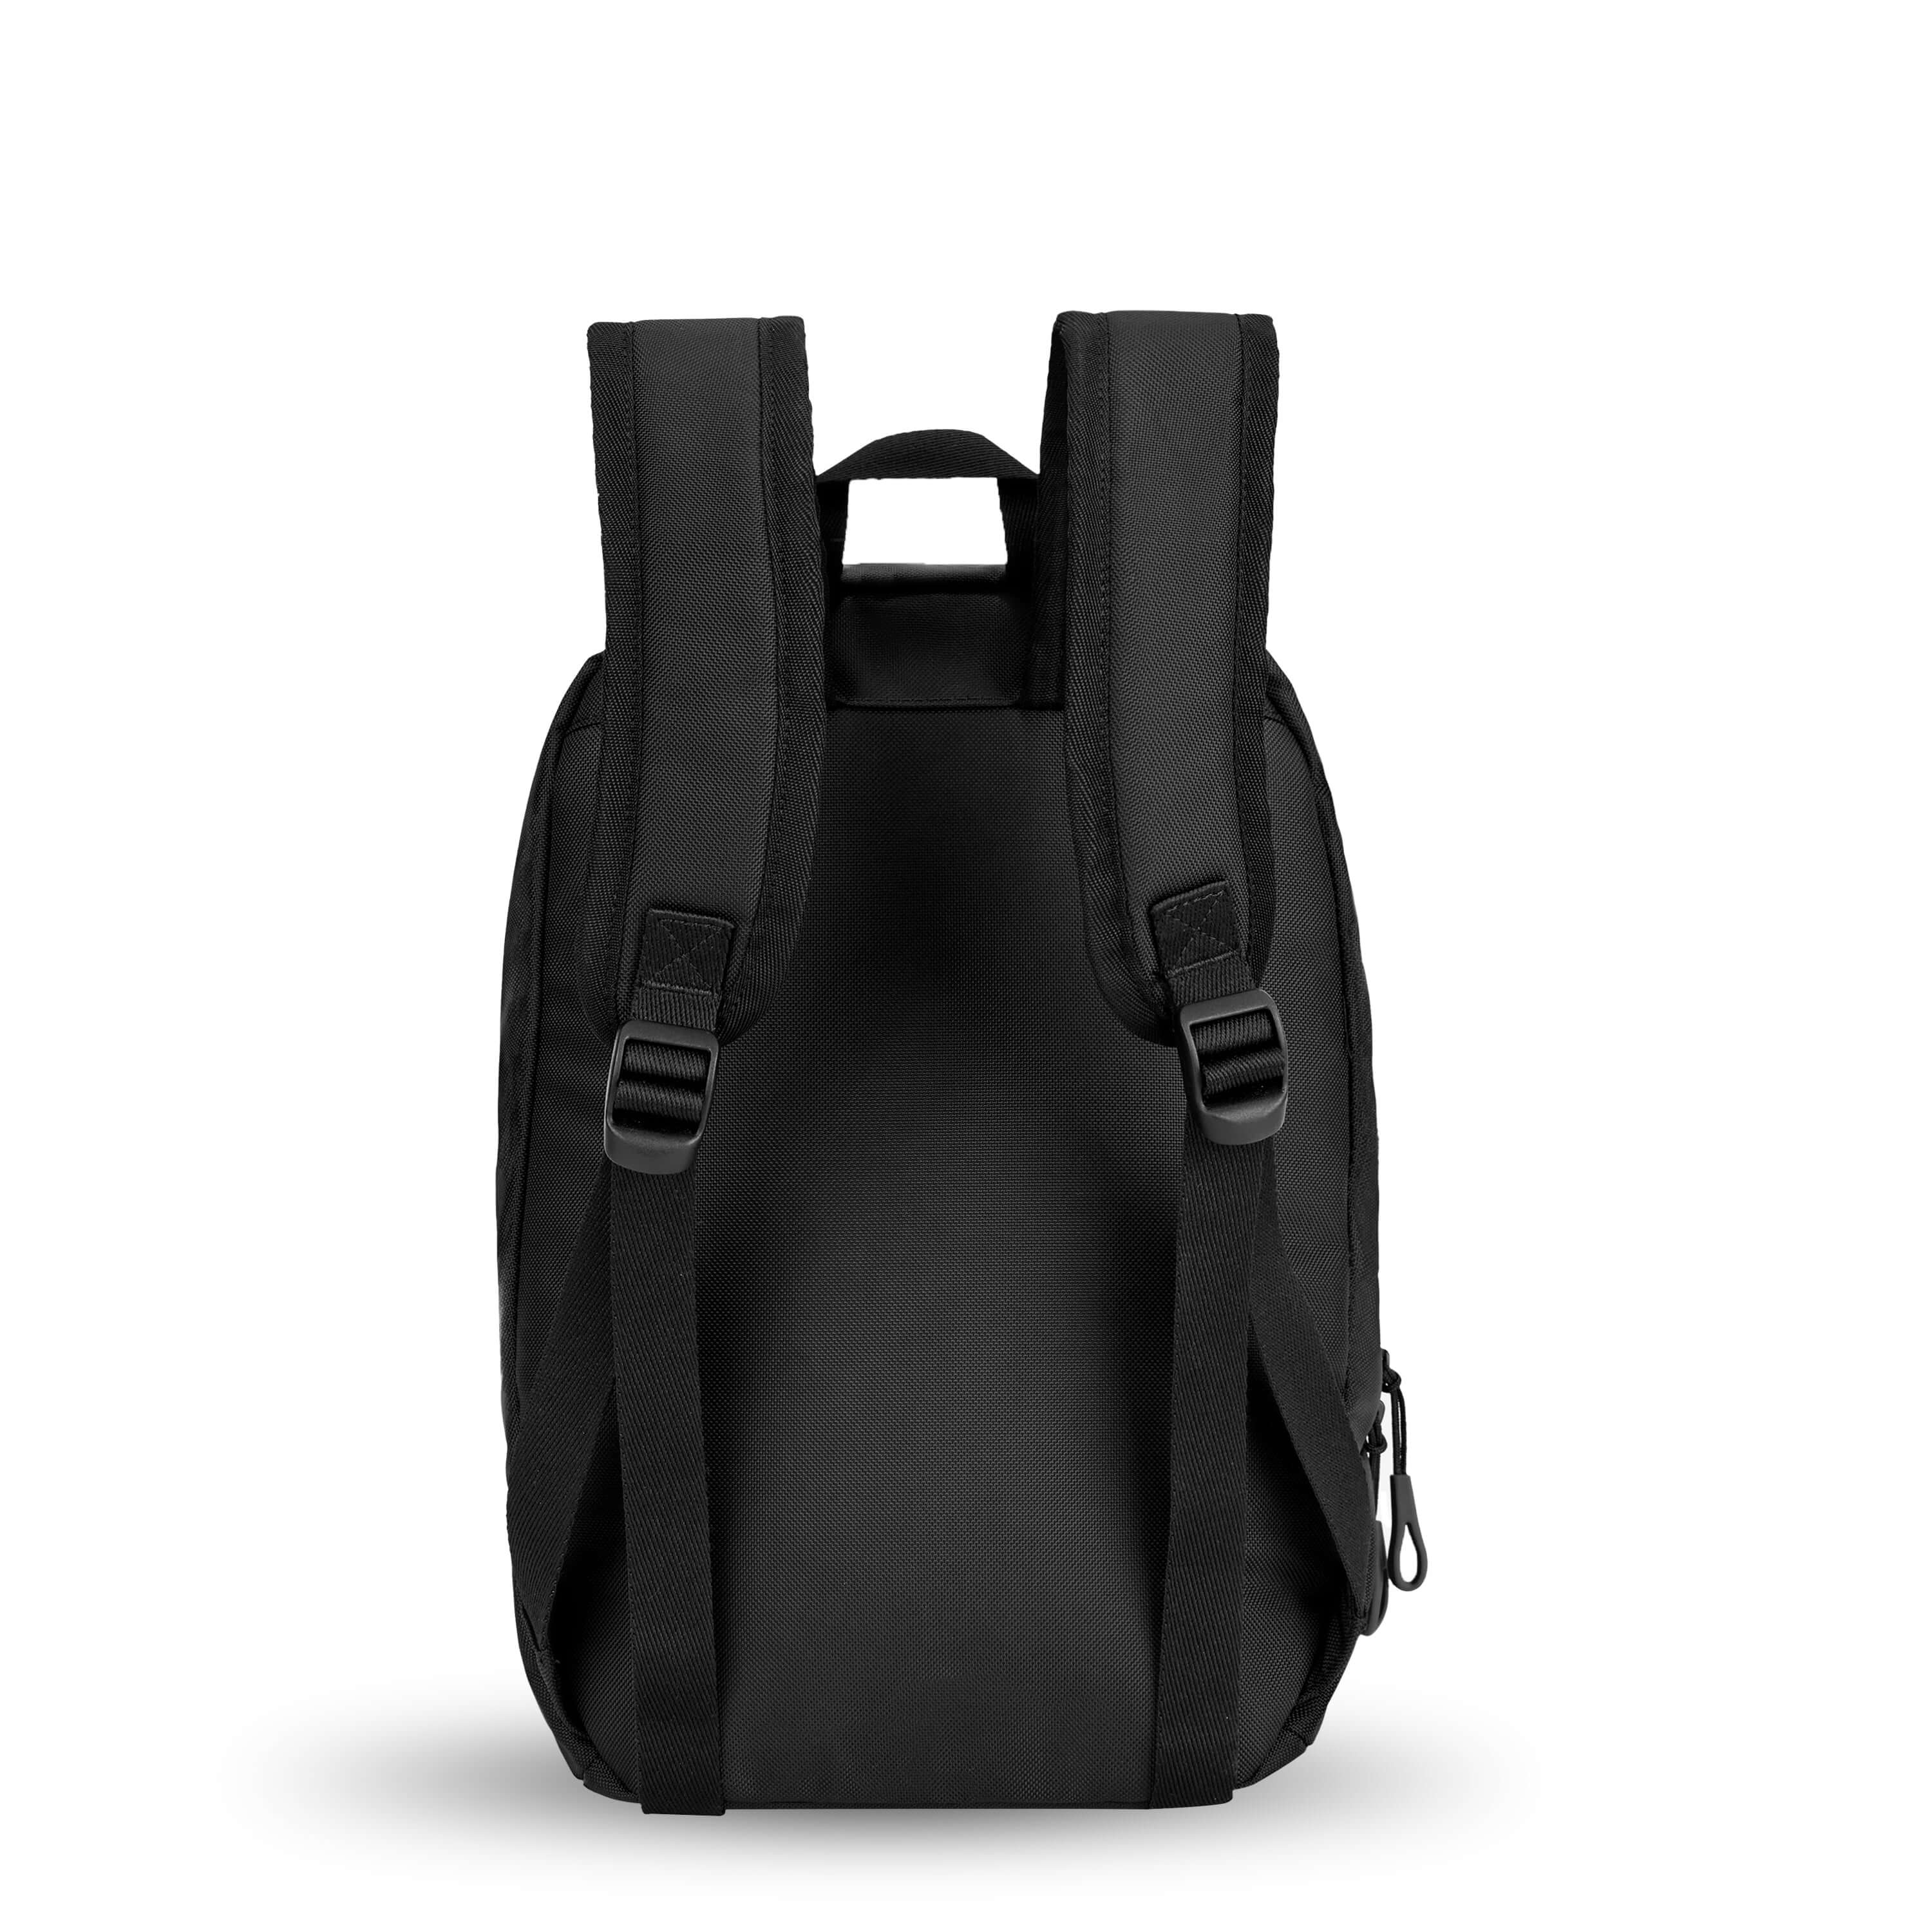 Back view of Sherpani mini backpack, the Vespa in Raven. The bag features padded and adjustable backpack straps, as well as a tote handle for easy carrying. The back of the bag is entirely black.